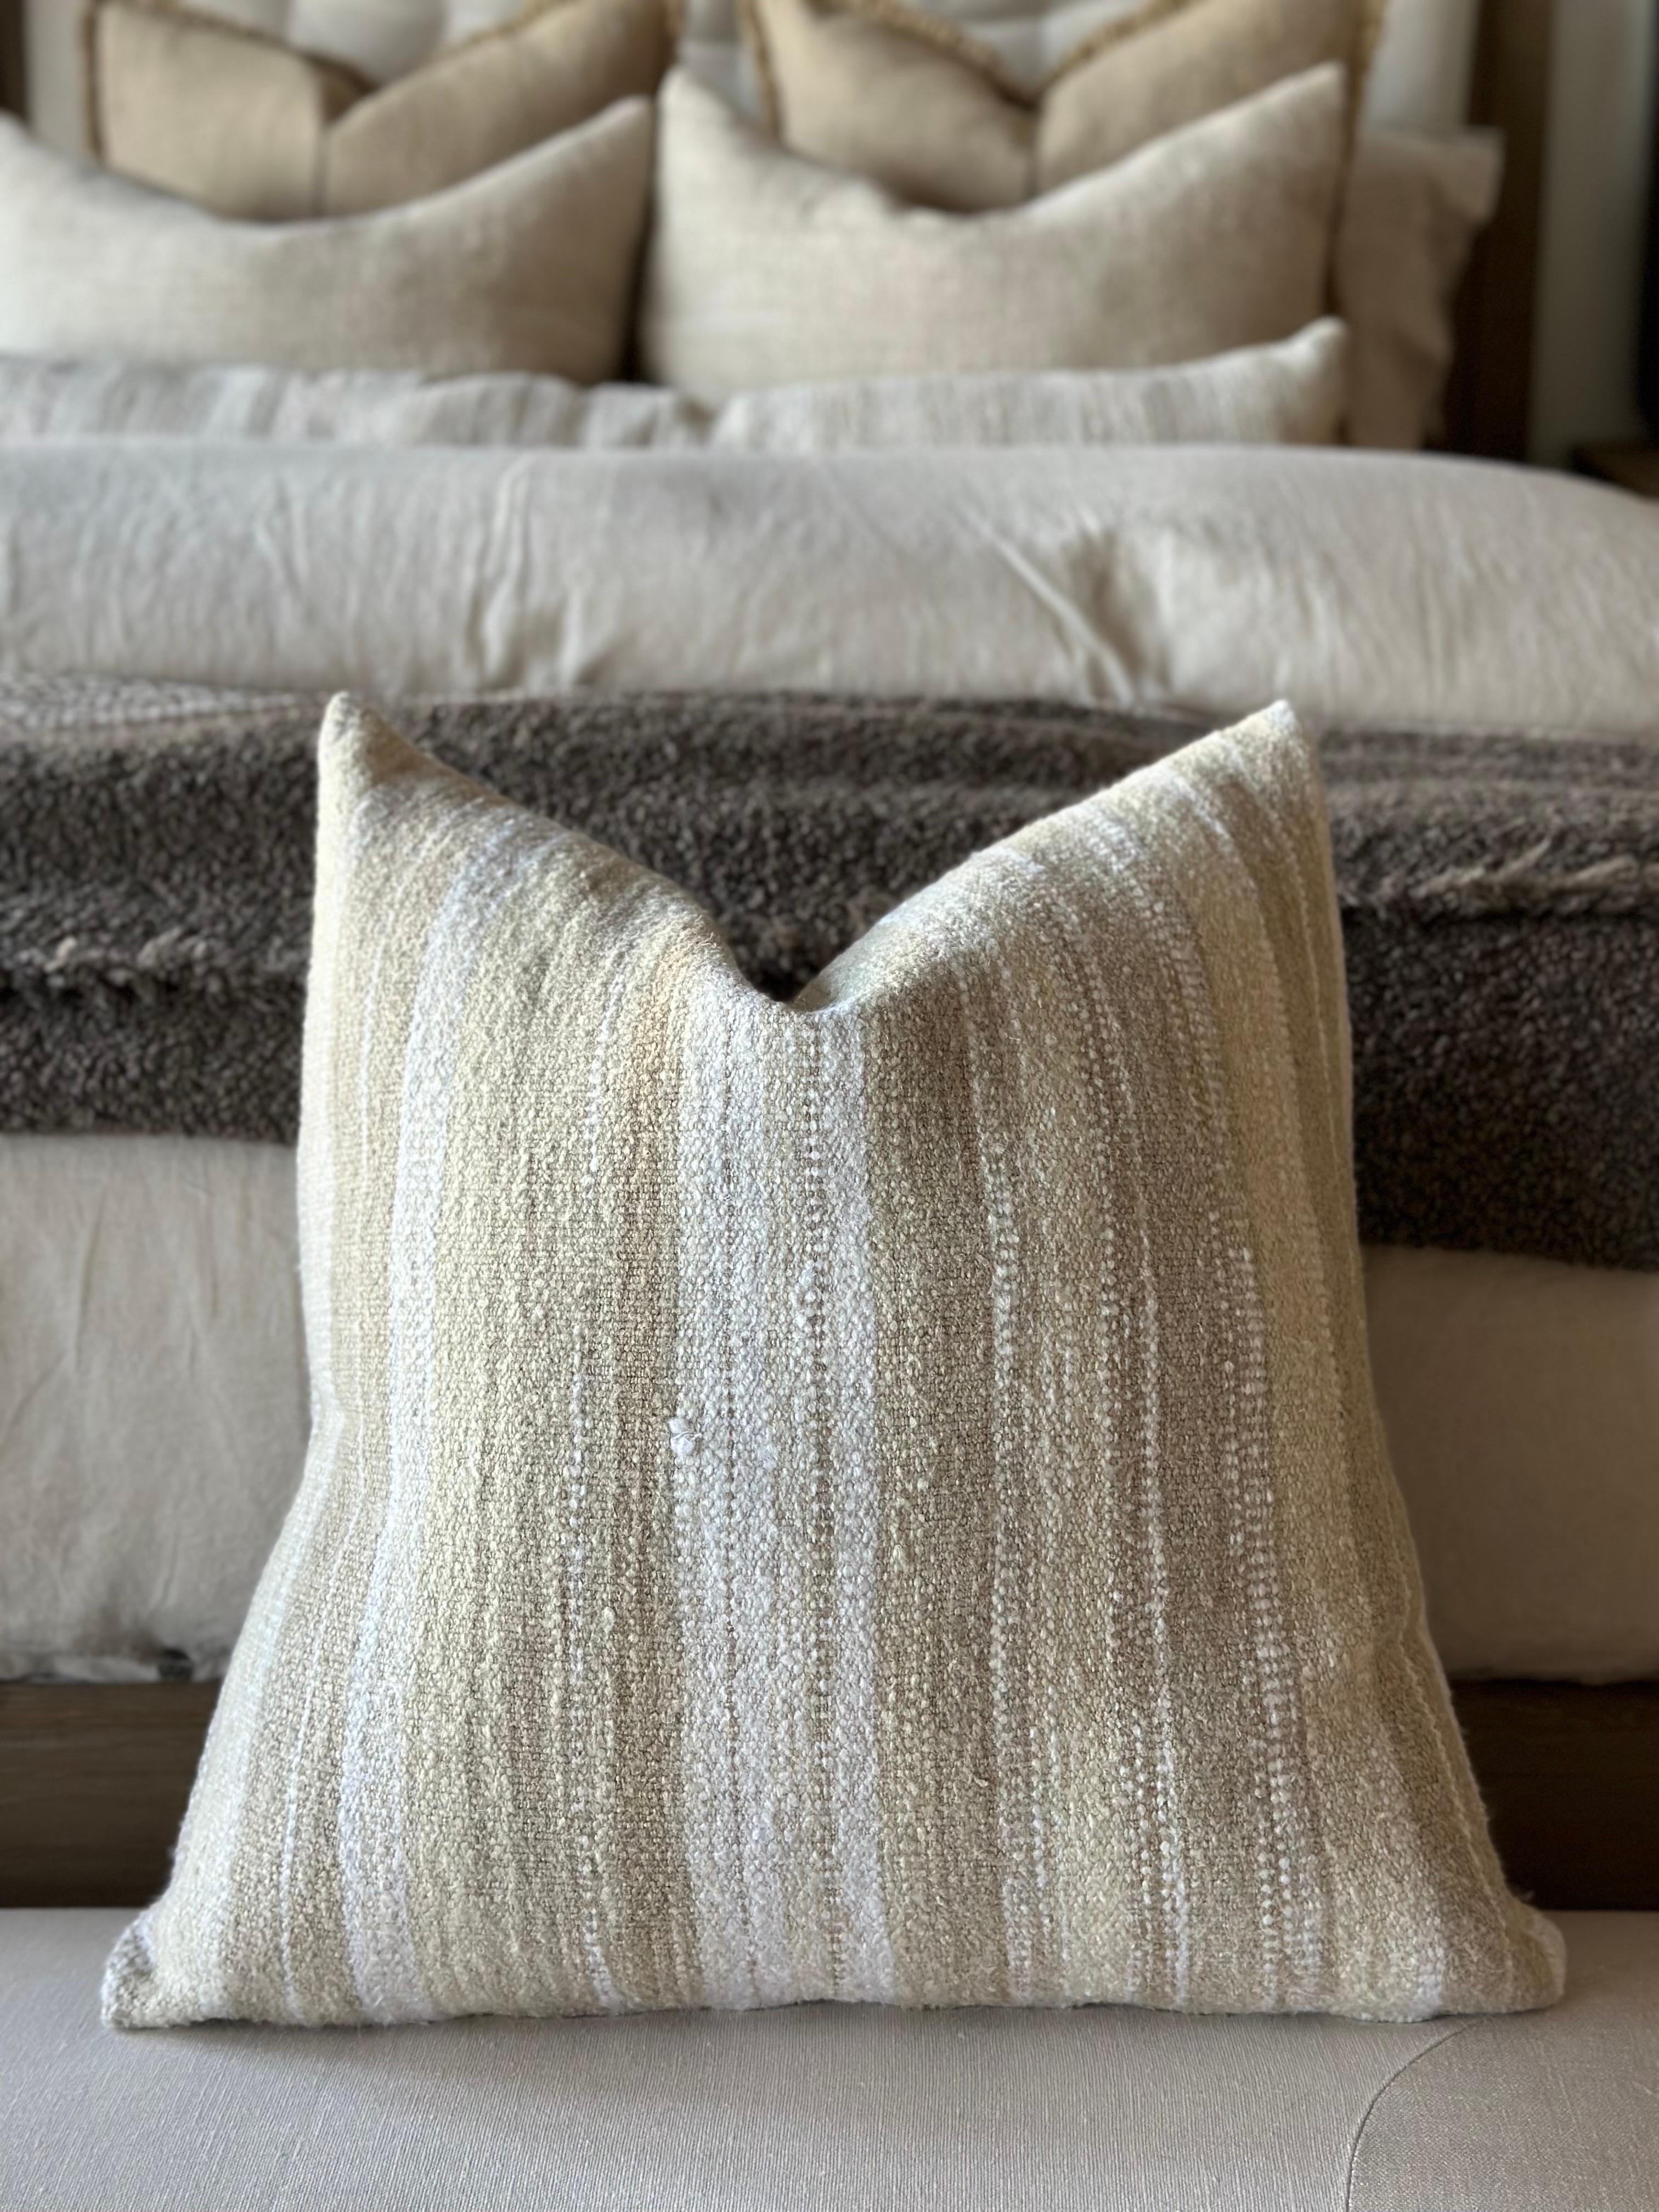 Woven in Belgium using traditional weaving techniques, Nagy combines Belgian linen with soft viscose. The slub like yarns alternating color along the warp create an inspired stripe from vintage textiles with some vibrant variations.
Size: 23